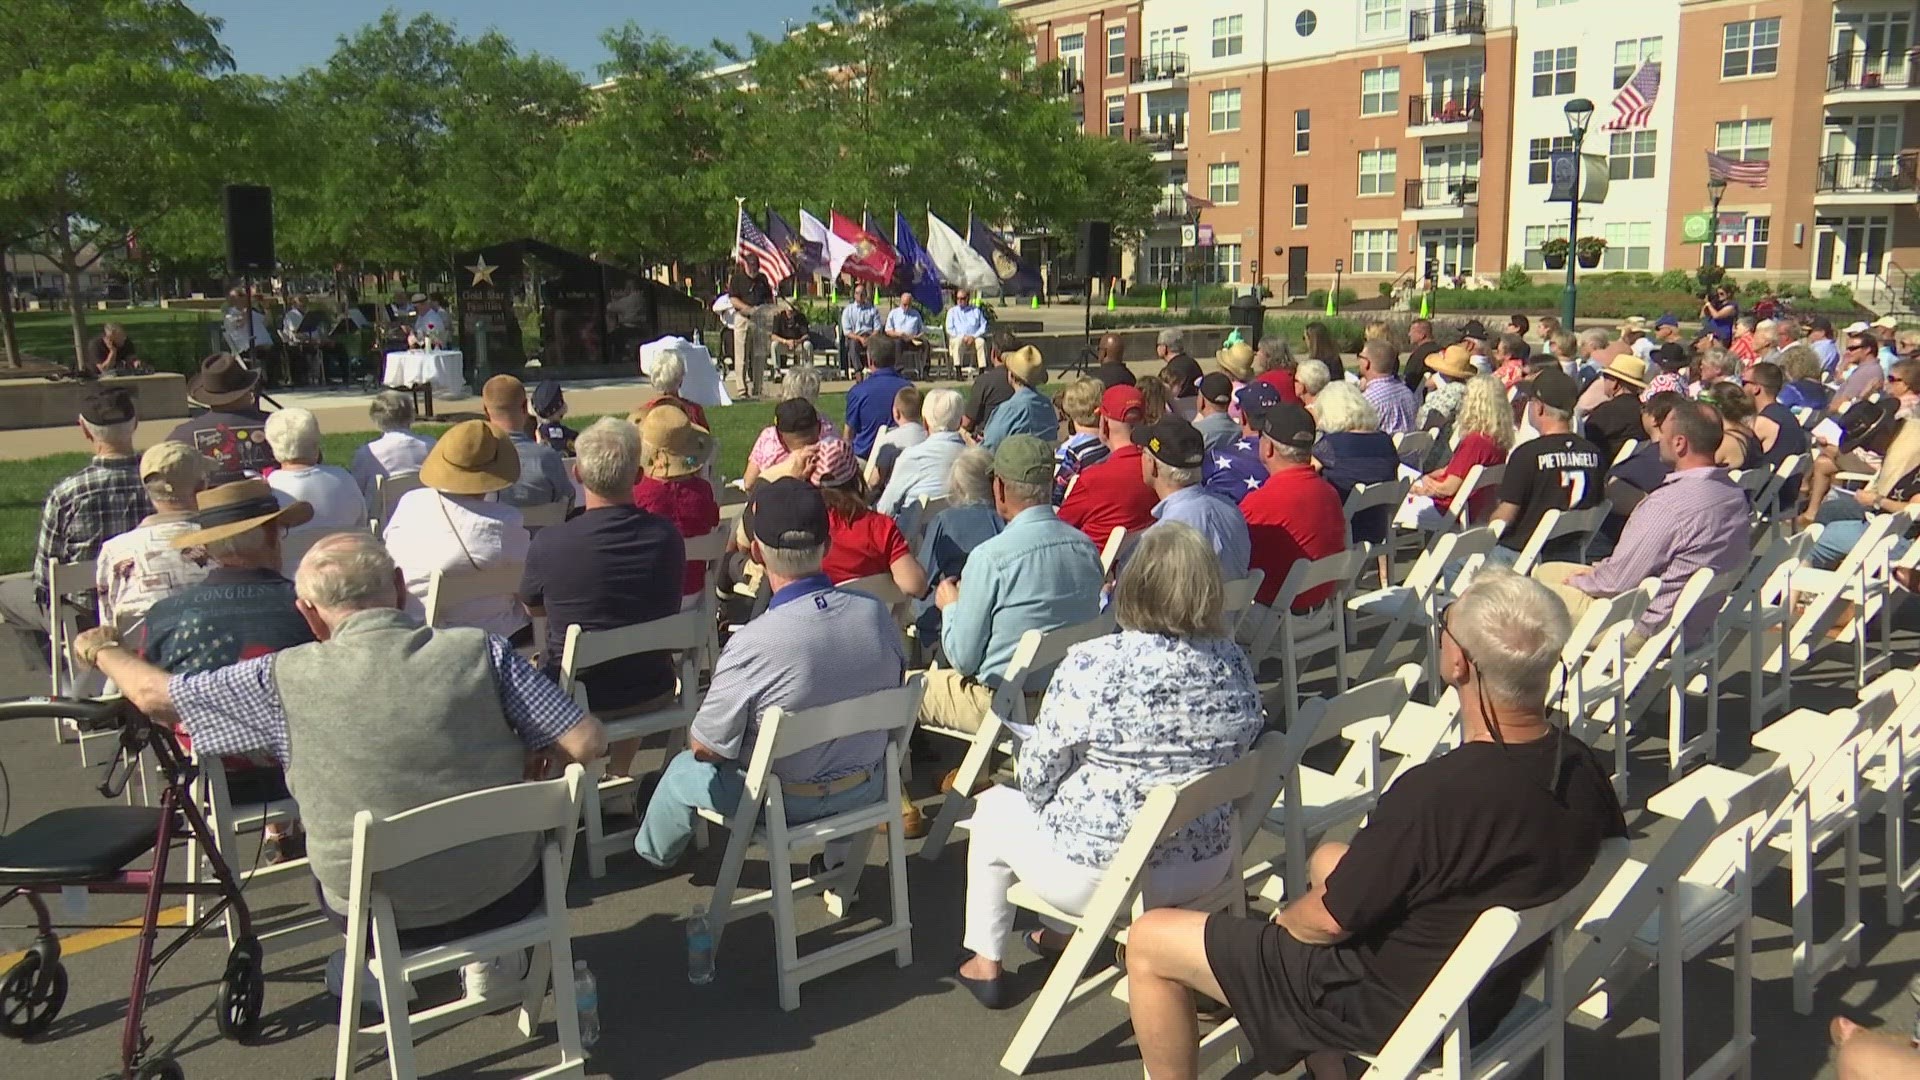 Fishers city officials will host the city's annual Memorial Day ceremony.